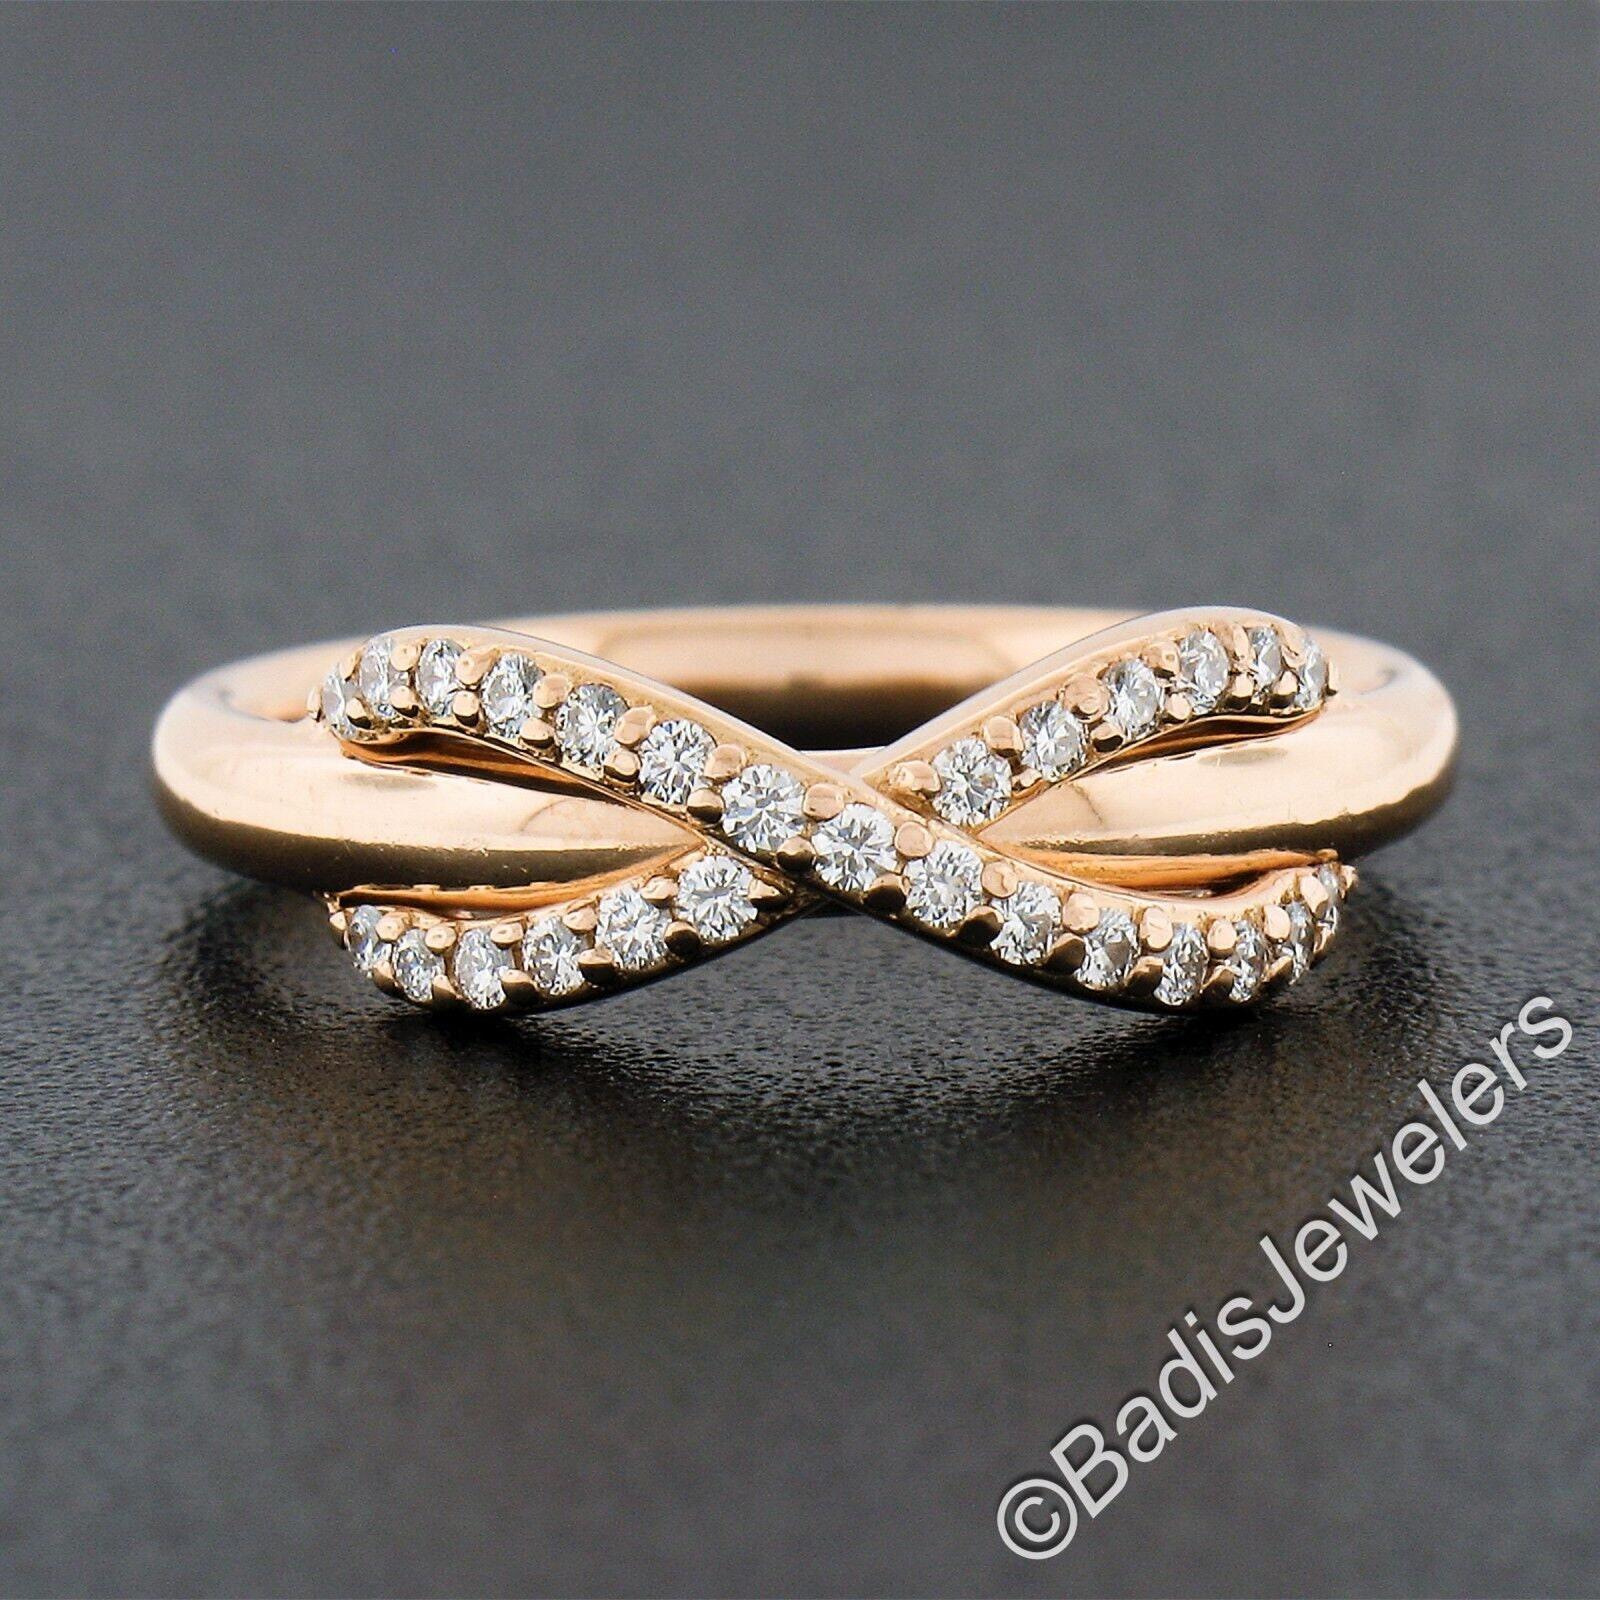 Here we have a Tiffany & Co. band ring crafted from solid 18k rose gold. This gorgeous band has a lovely infinity style design at its top that is perfectly lined with super fine quality diamonds pave set throughout. These fiery diamonds are round